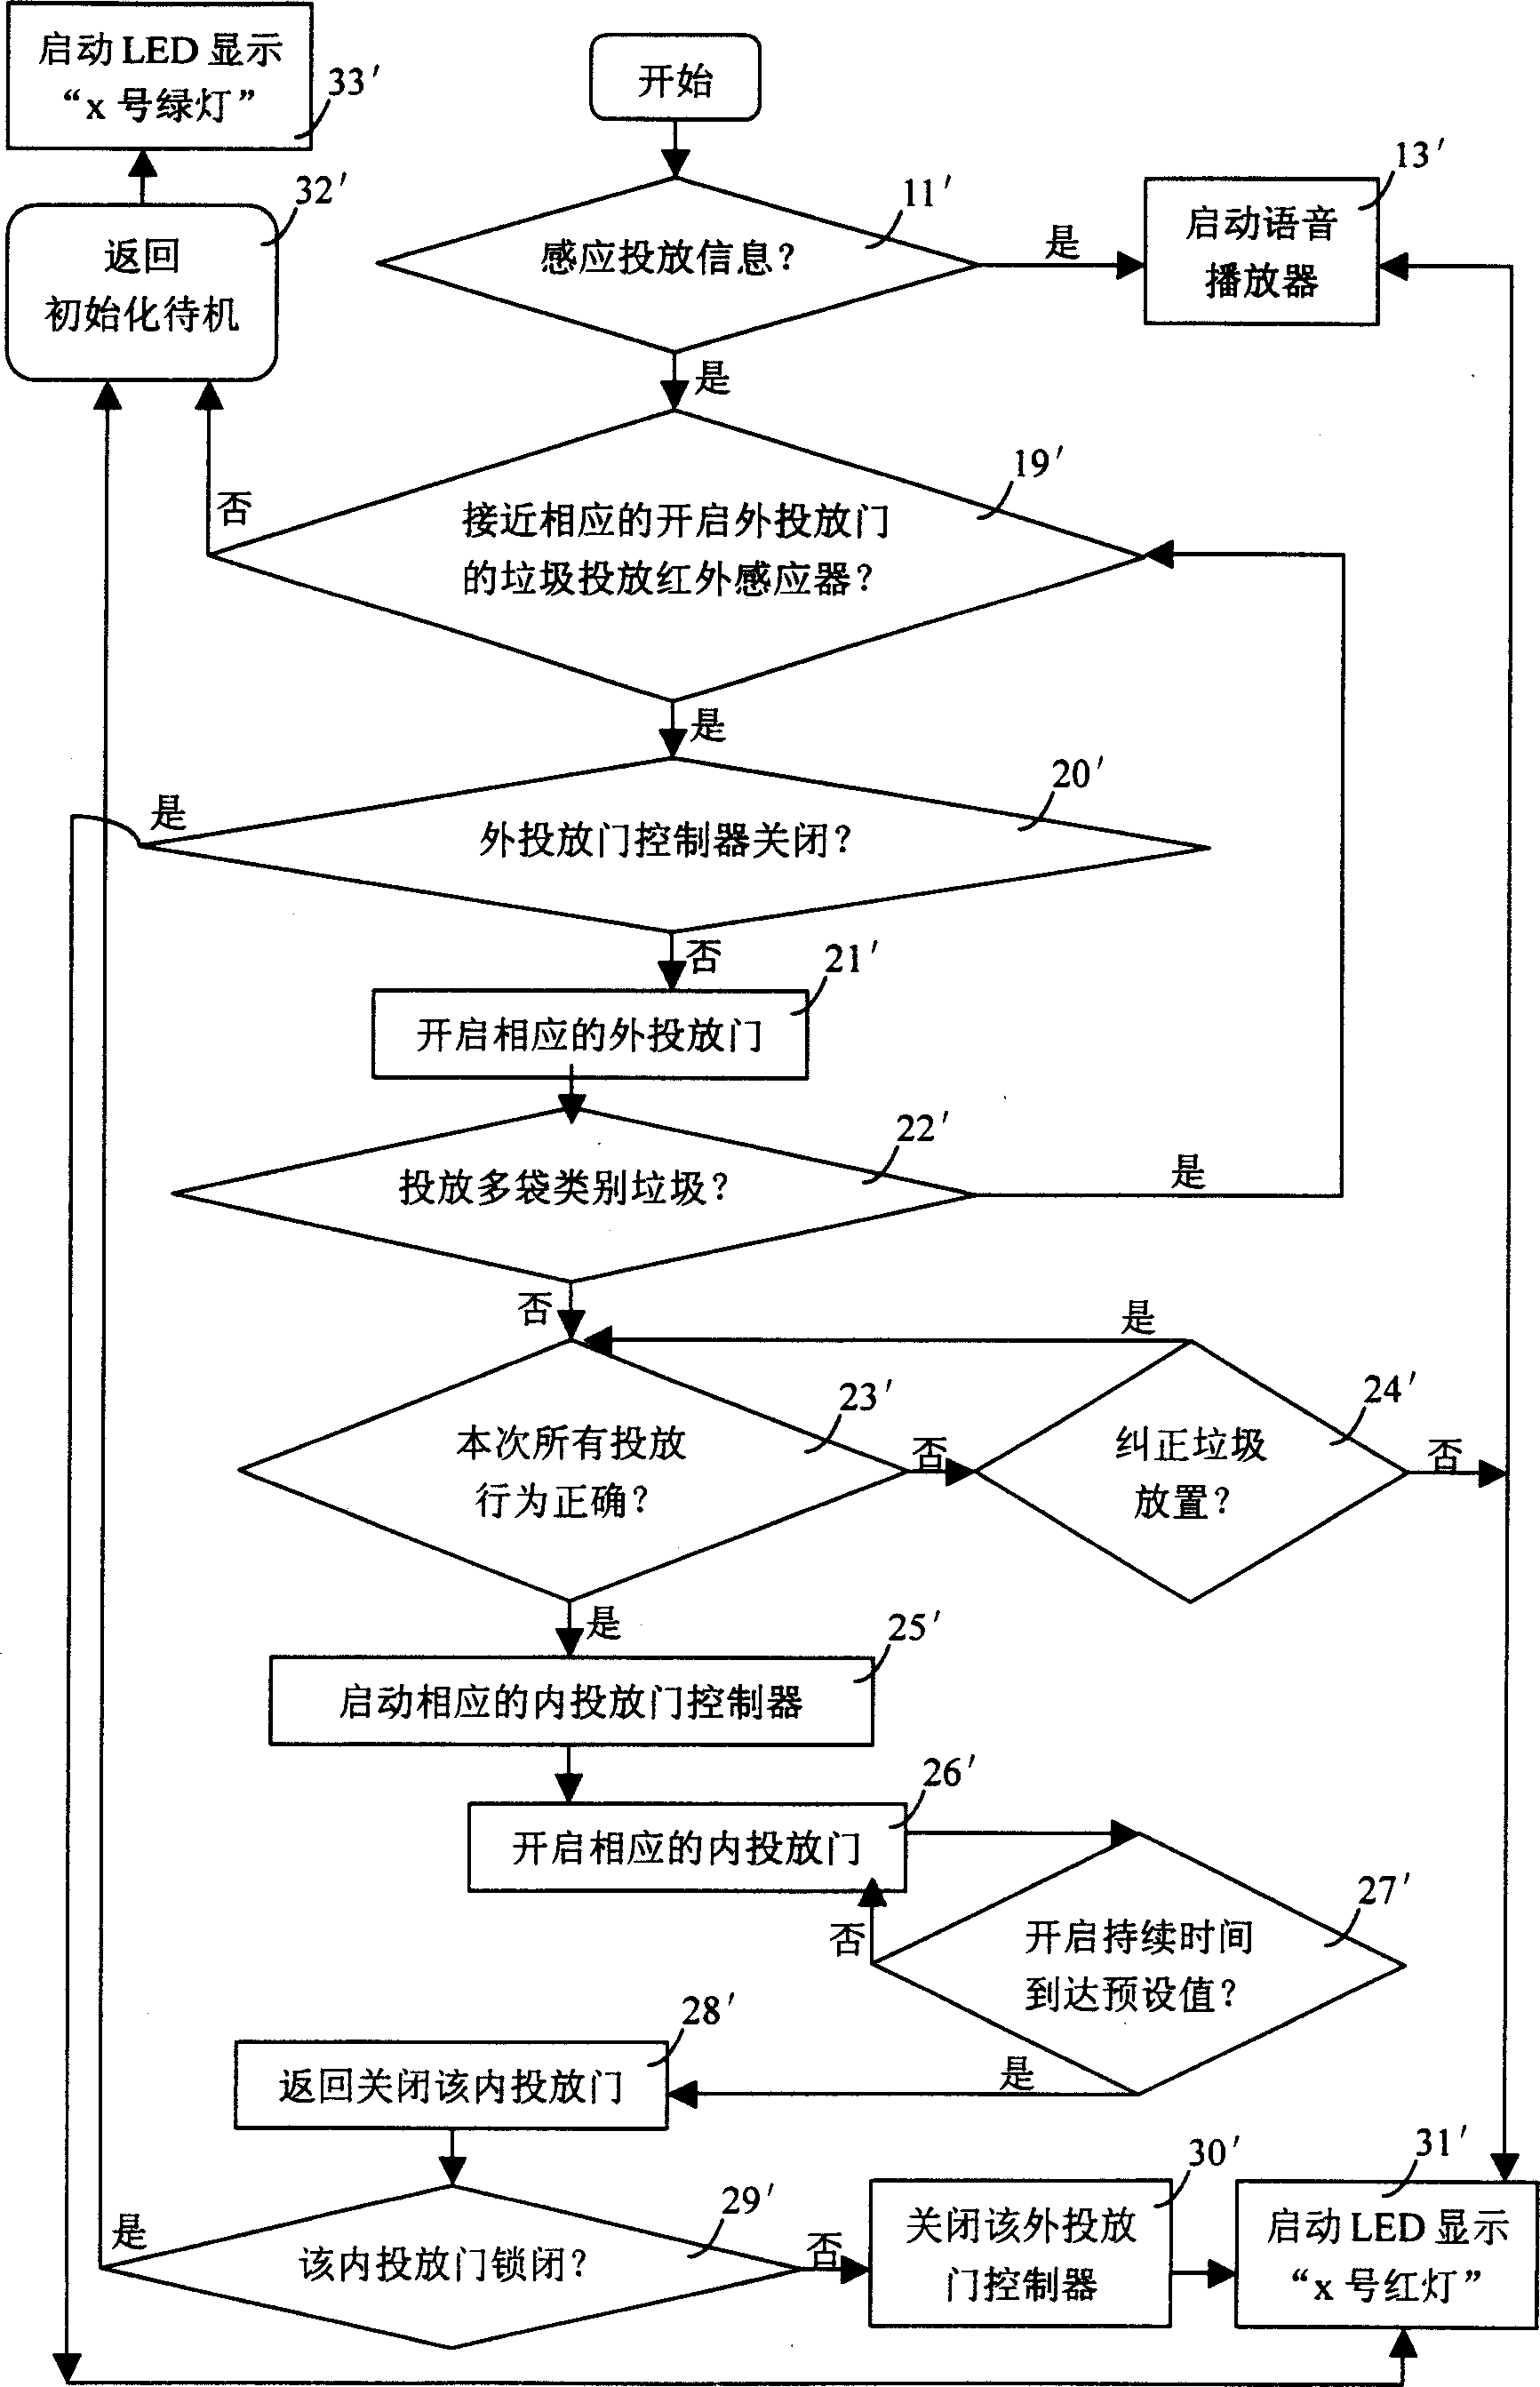 Automatic controlling method for garbage classifying putting-in and induction type automatic putting-in system